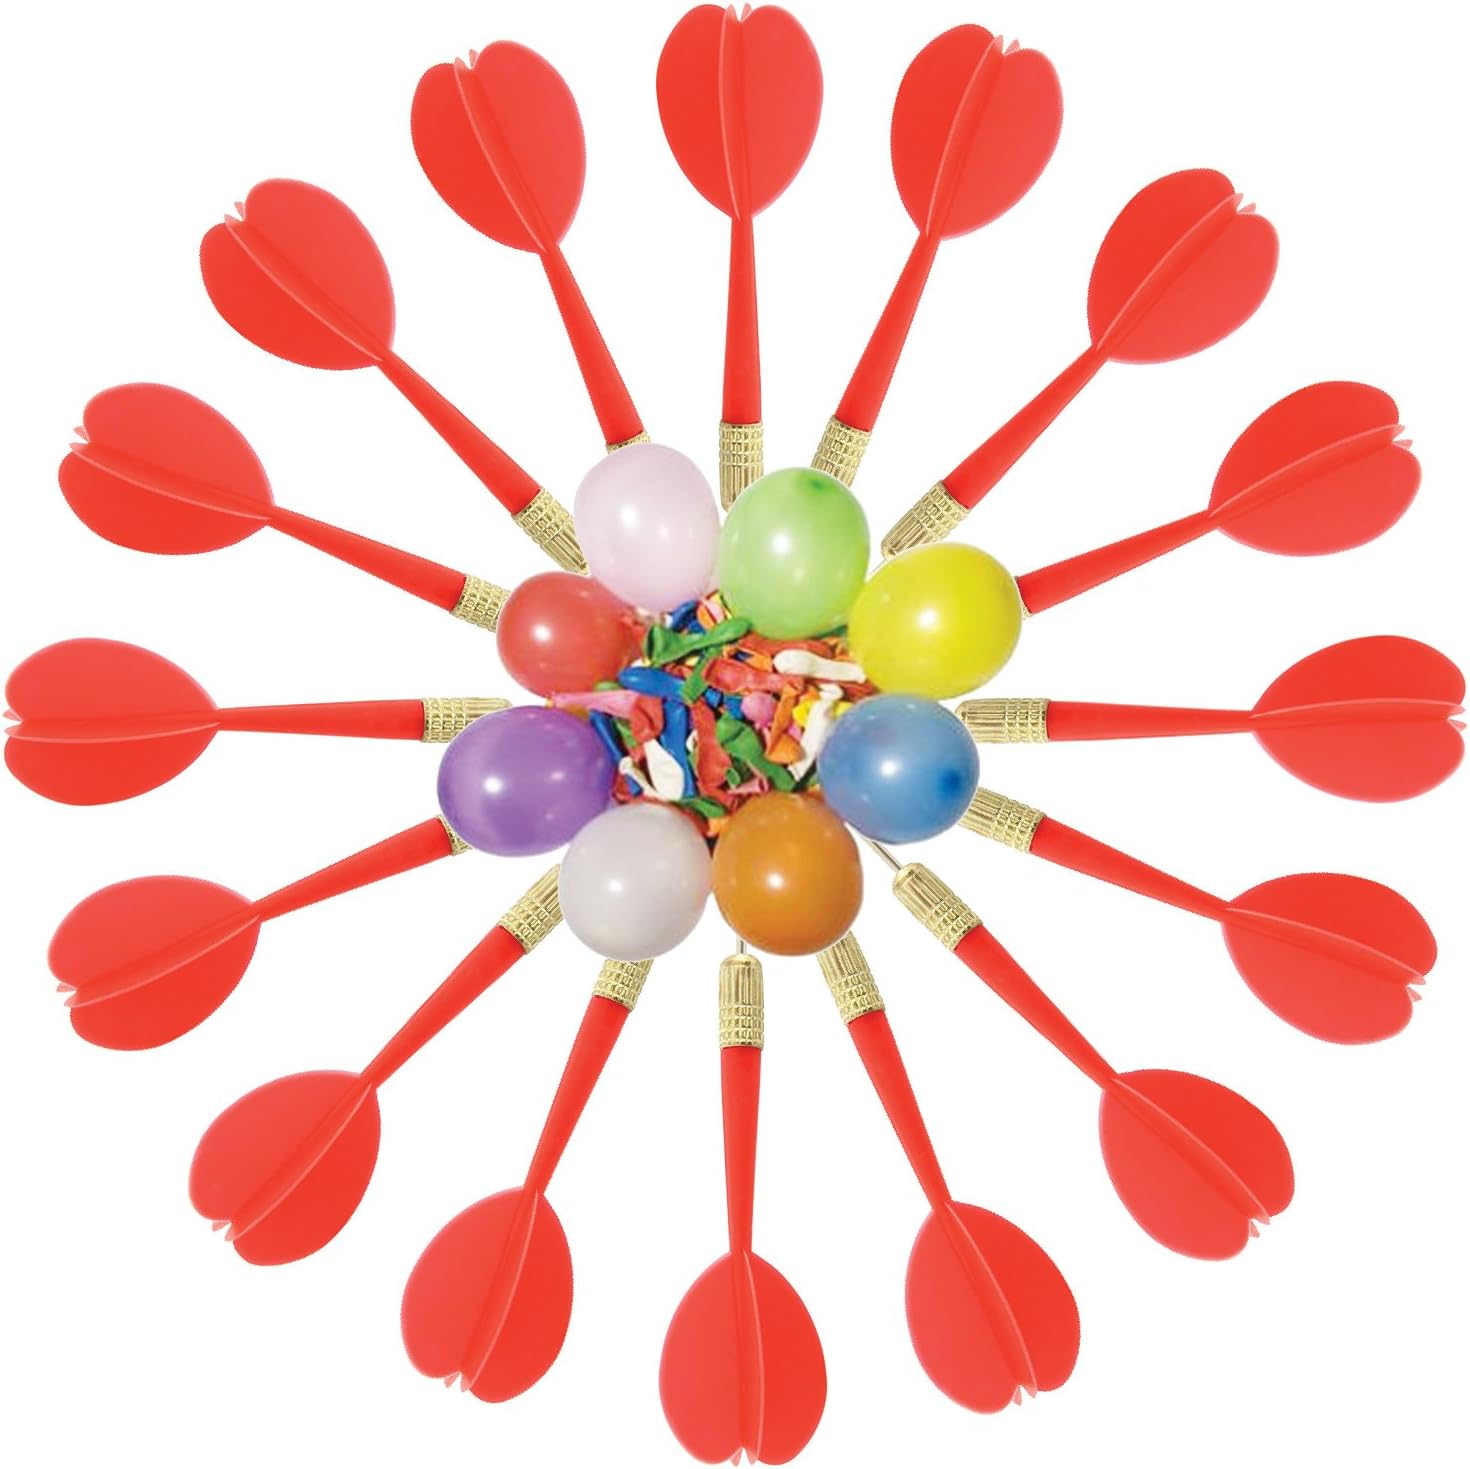 Gamie Dart Balloon Game Jumbo Fun Set includes 144 dart Balloons and 11 Plastic Darts with Copper Tips, Exciting Outdoor Game for Children and Adults, Best Carnival, Birthday Party and Backyard Fun